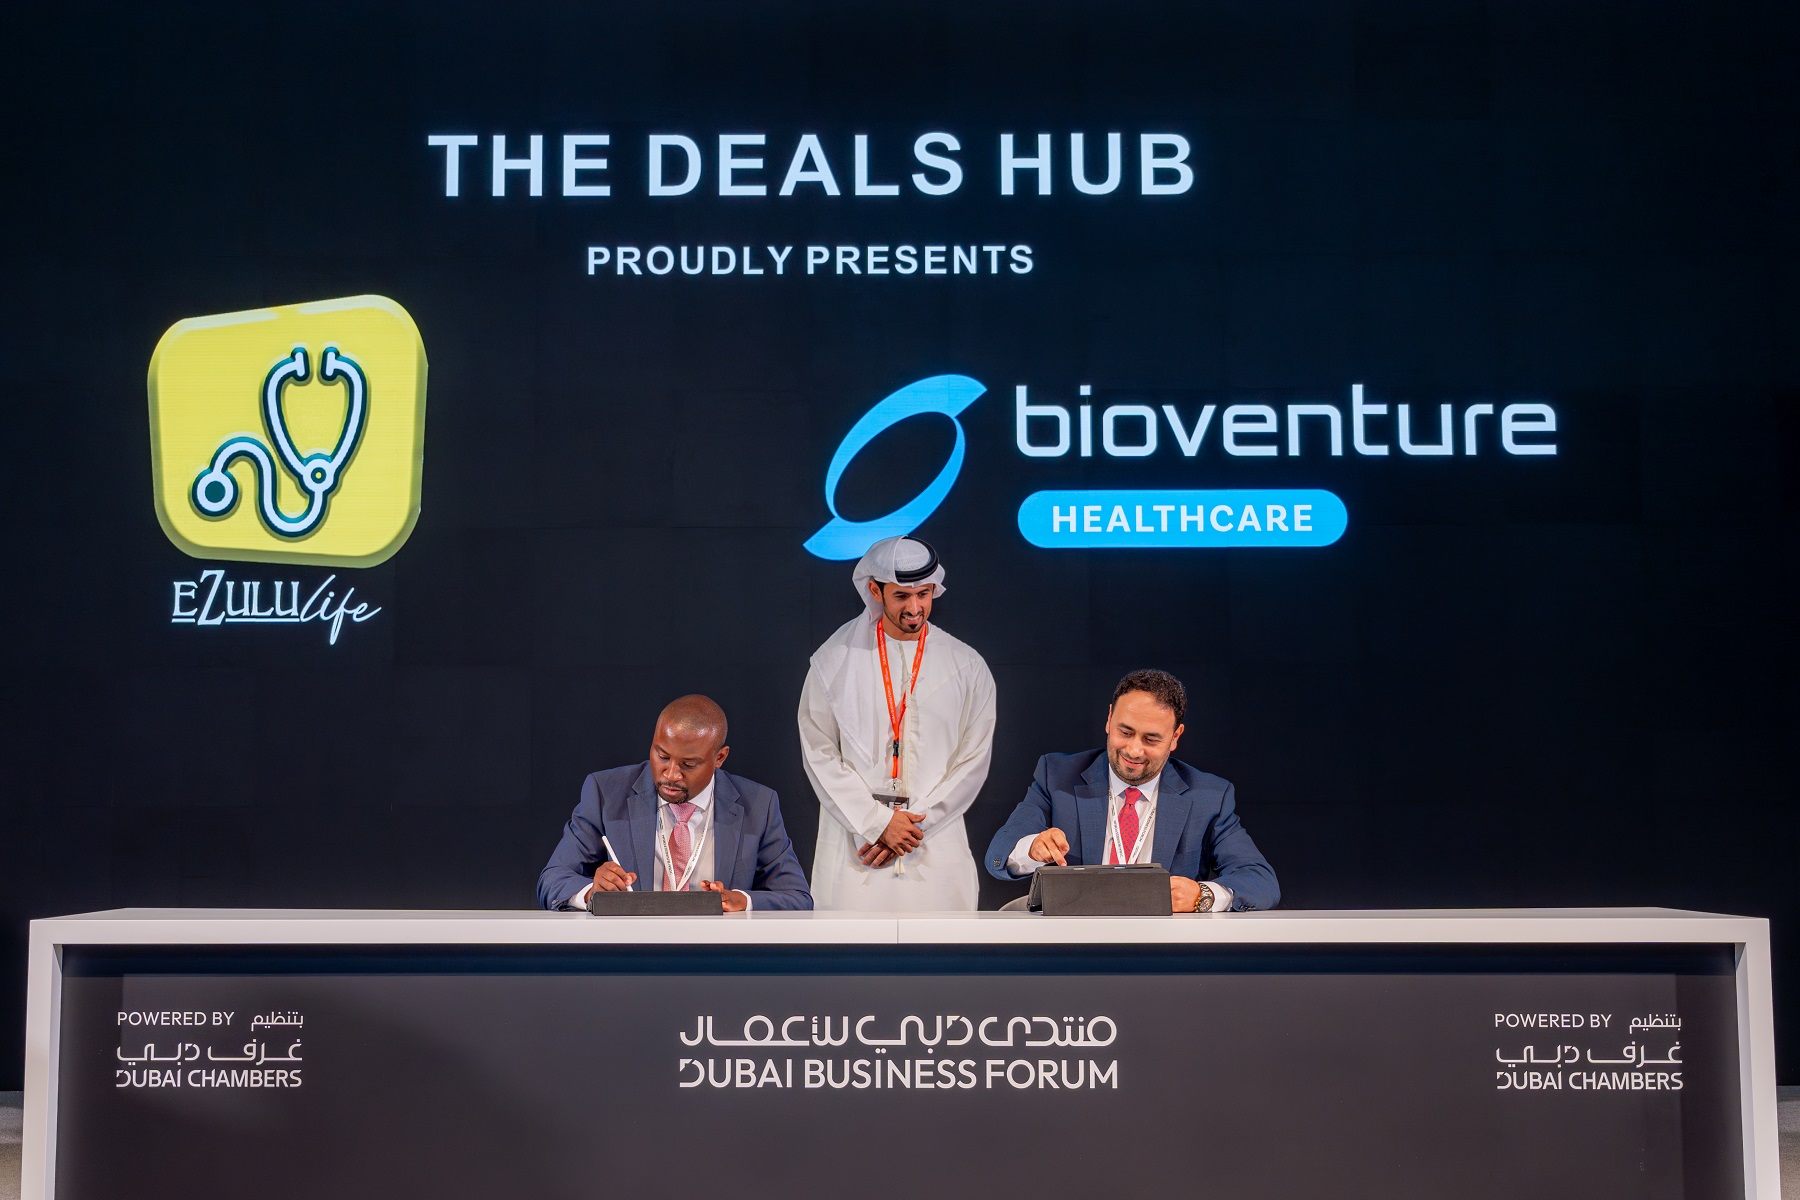 Bioventure Healthcare inks deal with EZulu Life during Dubai Business Forum to expand its reach in Africa